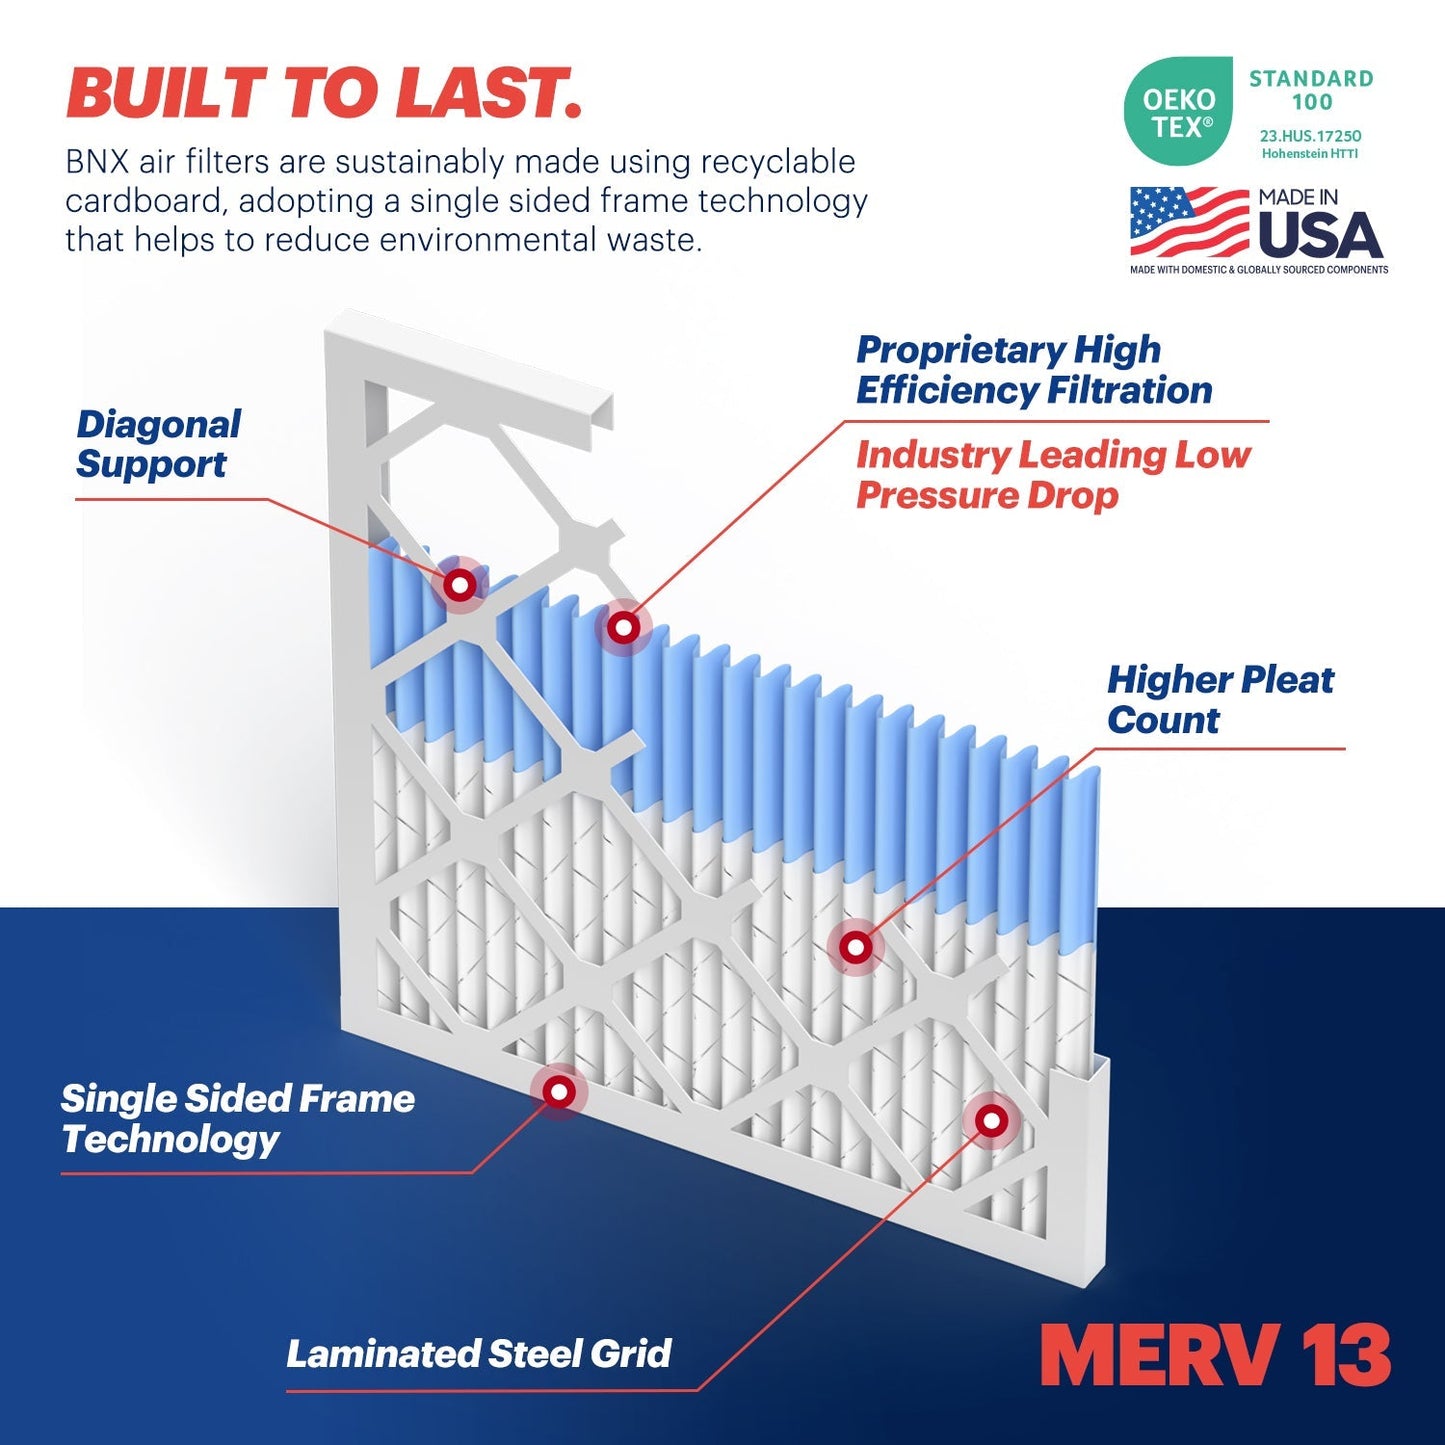 BNX TruFilter 20x22x1 MERV 13 Pleated Air Filter – Made in USA (6-Pack)